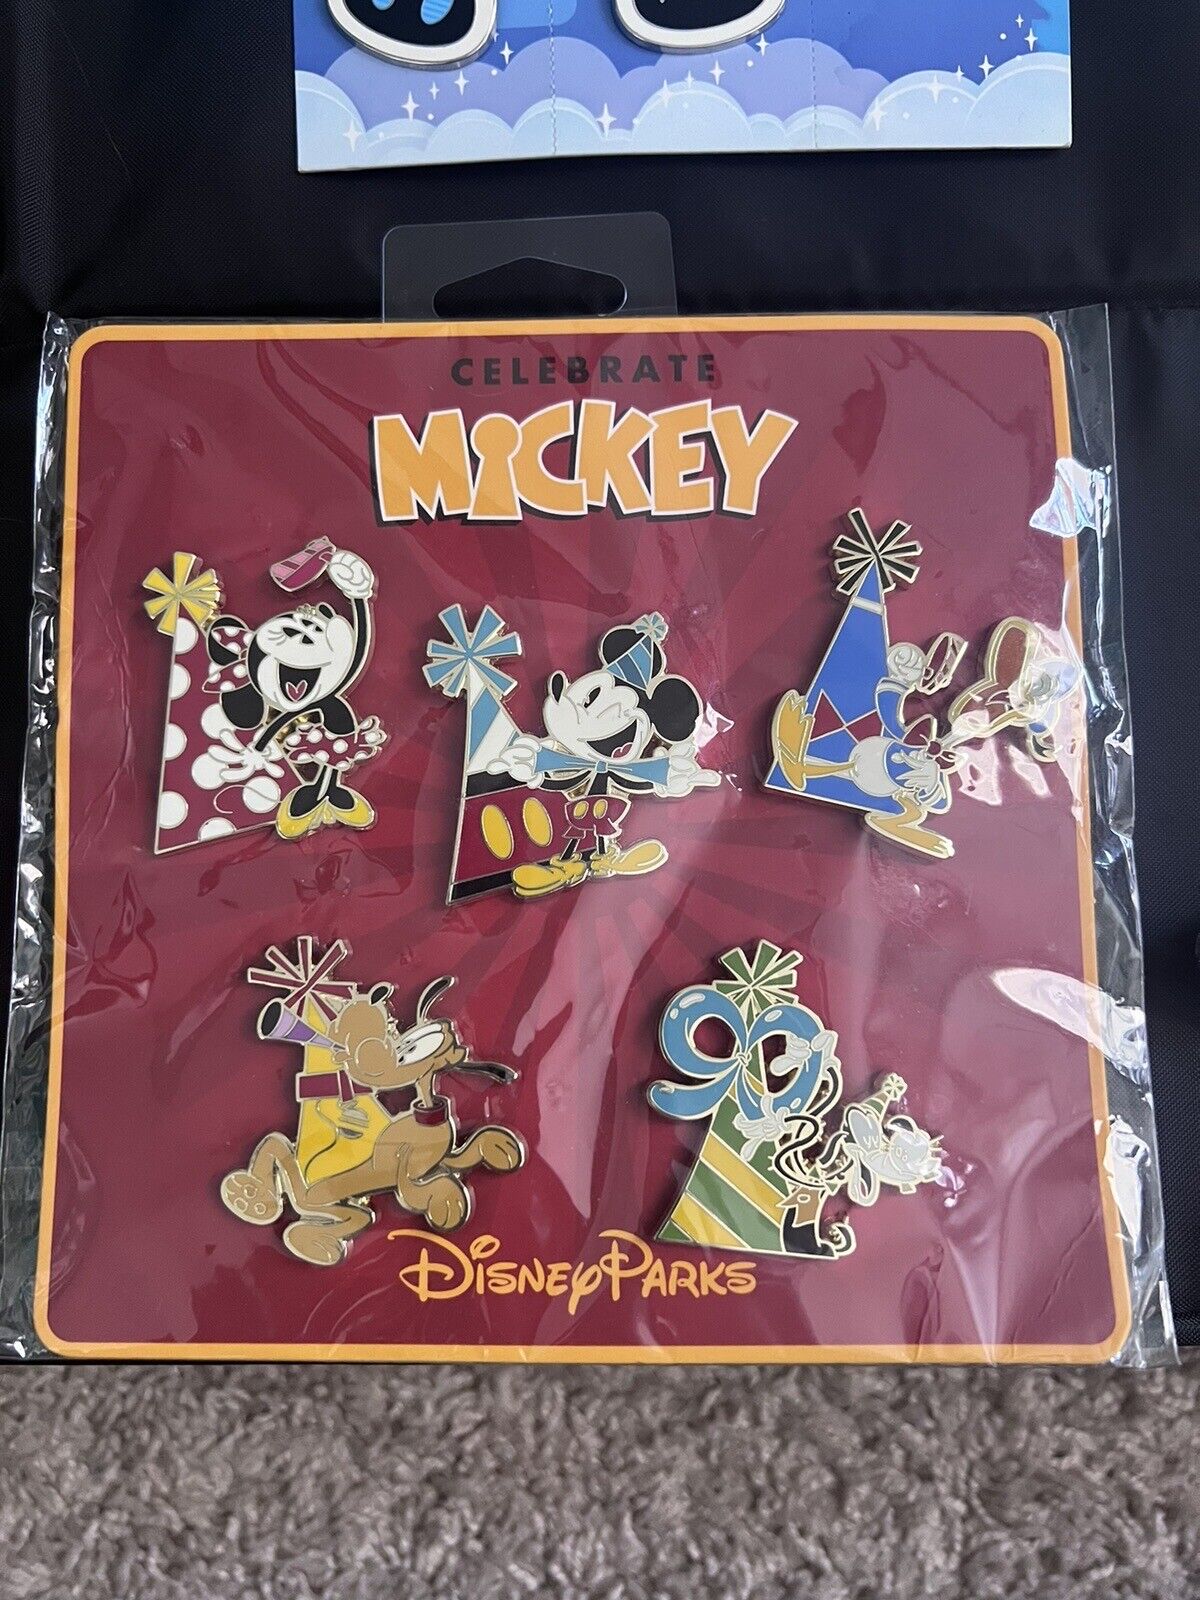 Disney Parks  Celebrate Mickey  & Friends 90th Booster 5 Pin Set (Sealed & New)